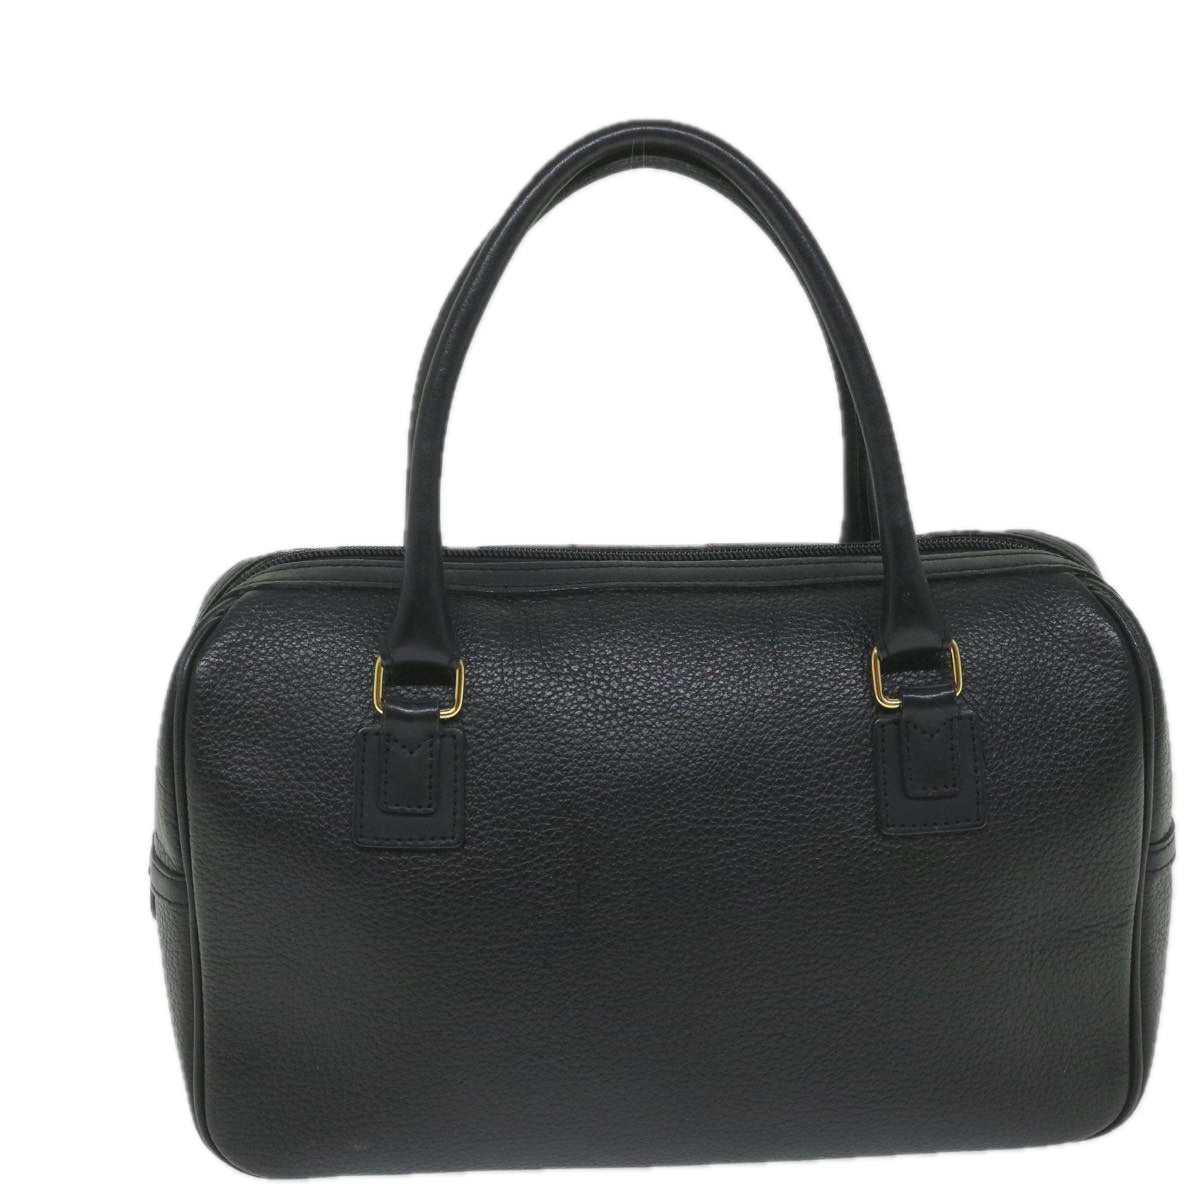 Burberrys Hand Bag Leather Black Auth bs9531 - 0